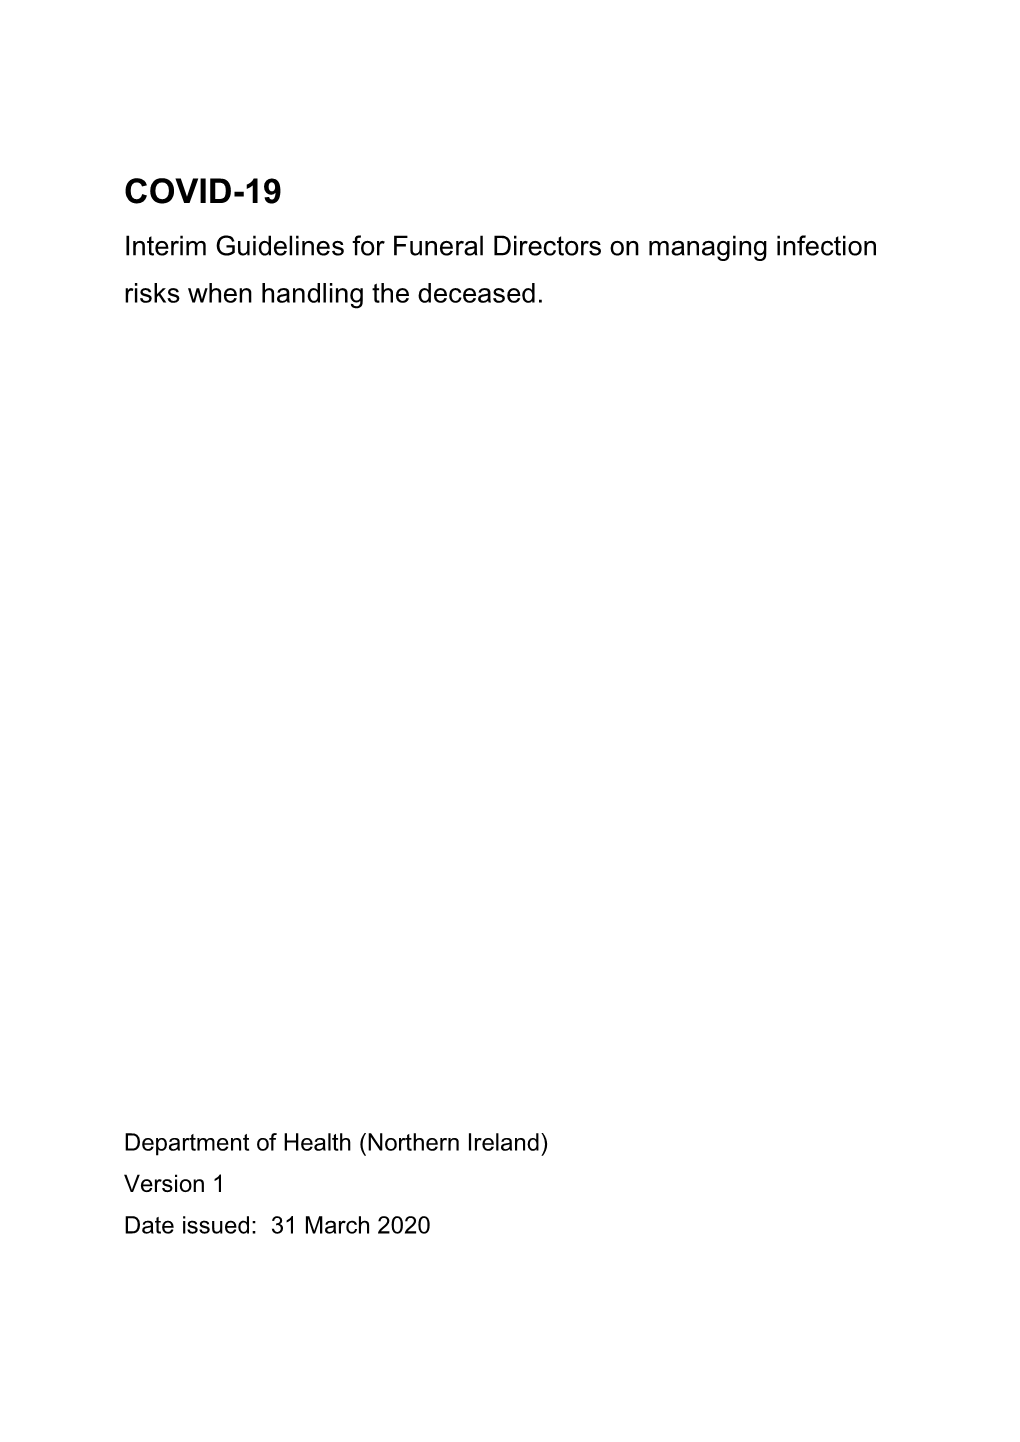 Guidance for Funeral Directors